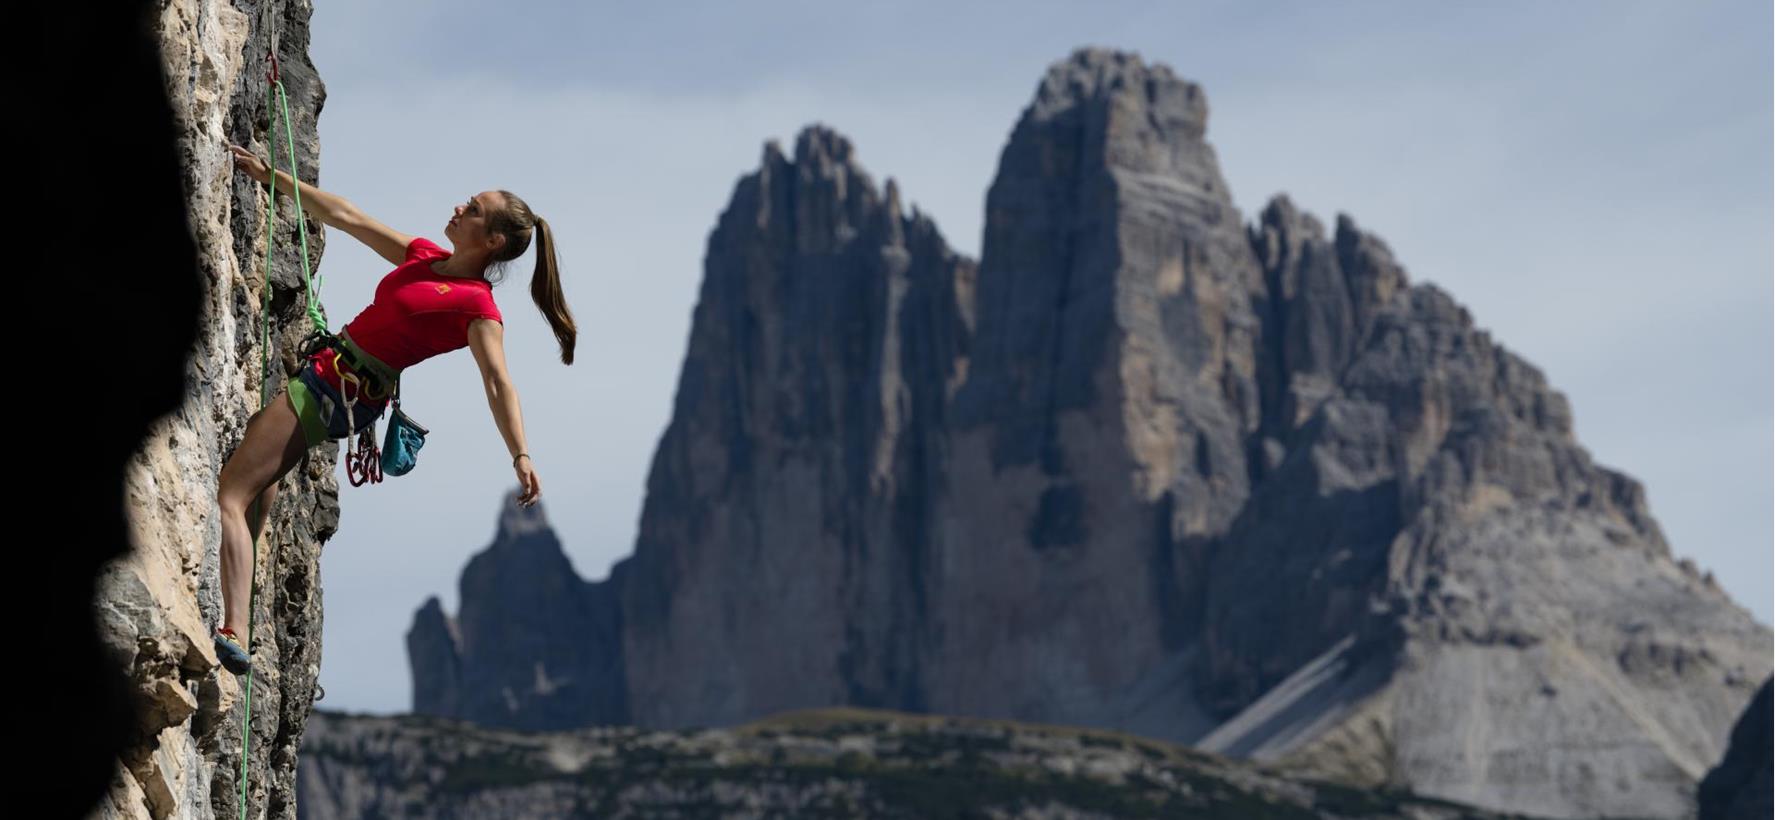 Climbing in the Dolomites